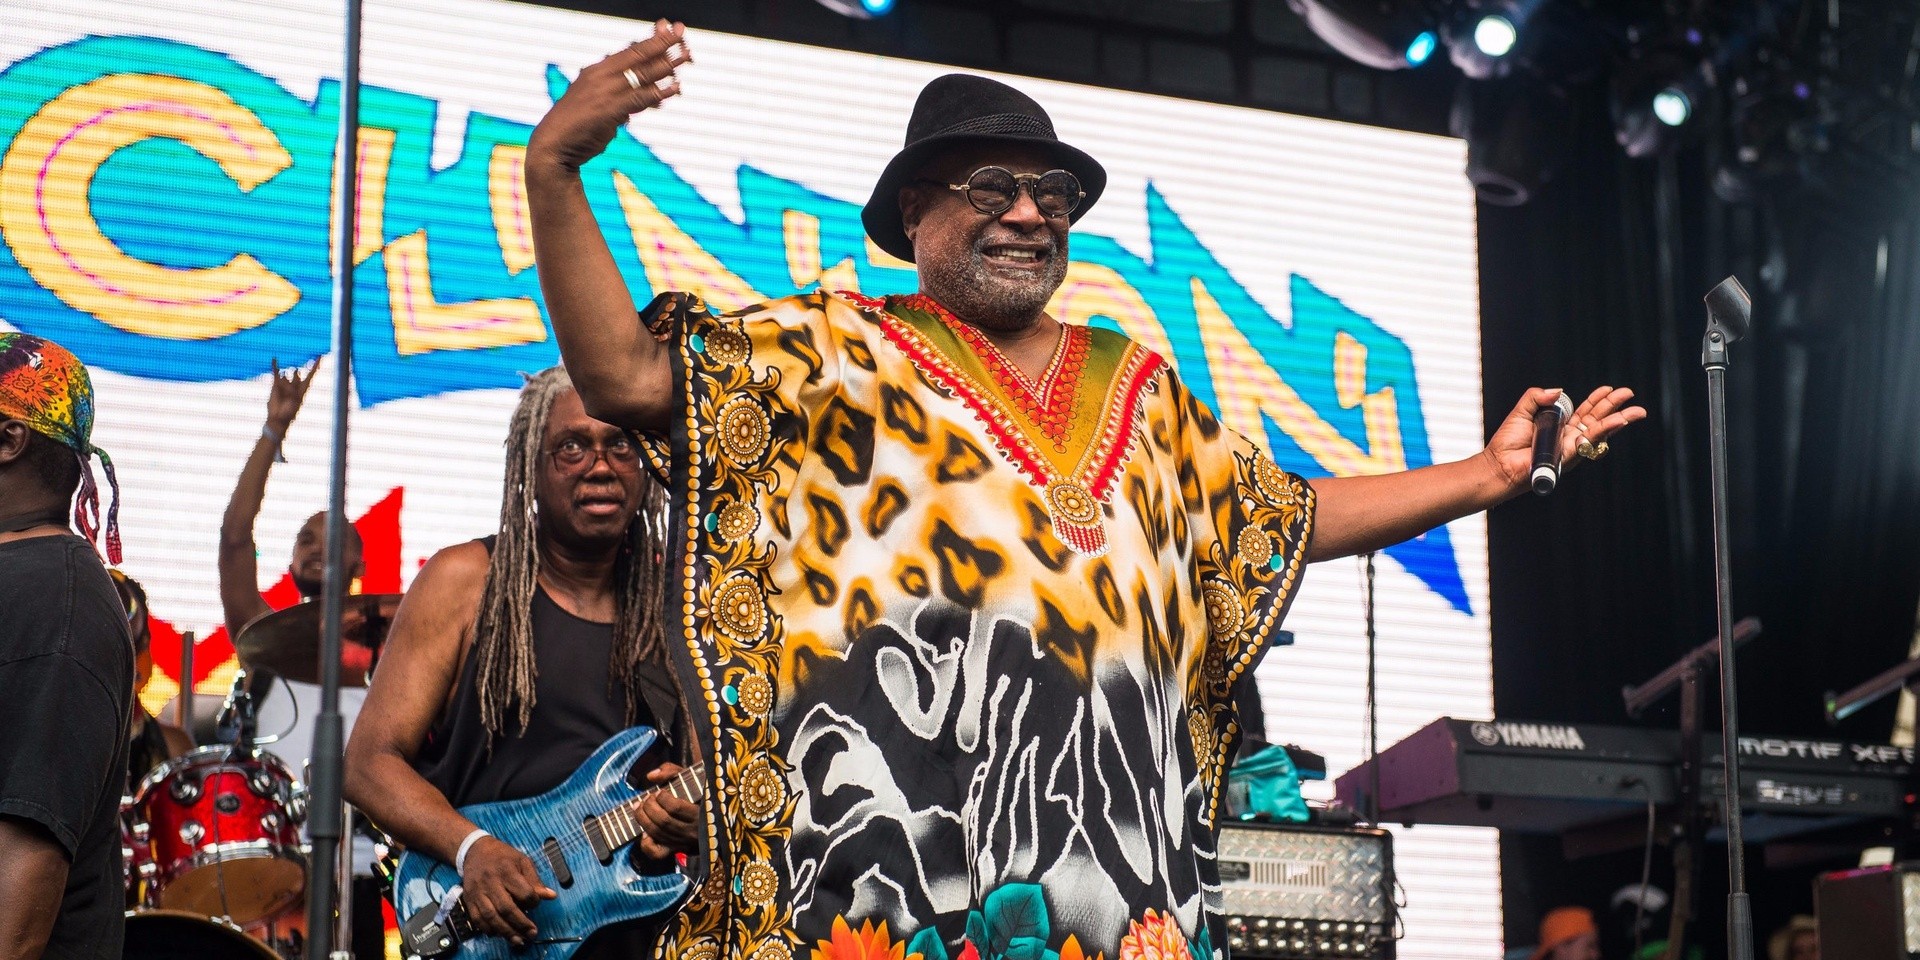 WATCH: George Clinton catches up with old friends The Sugarhill Gang over drinks in Singapore